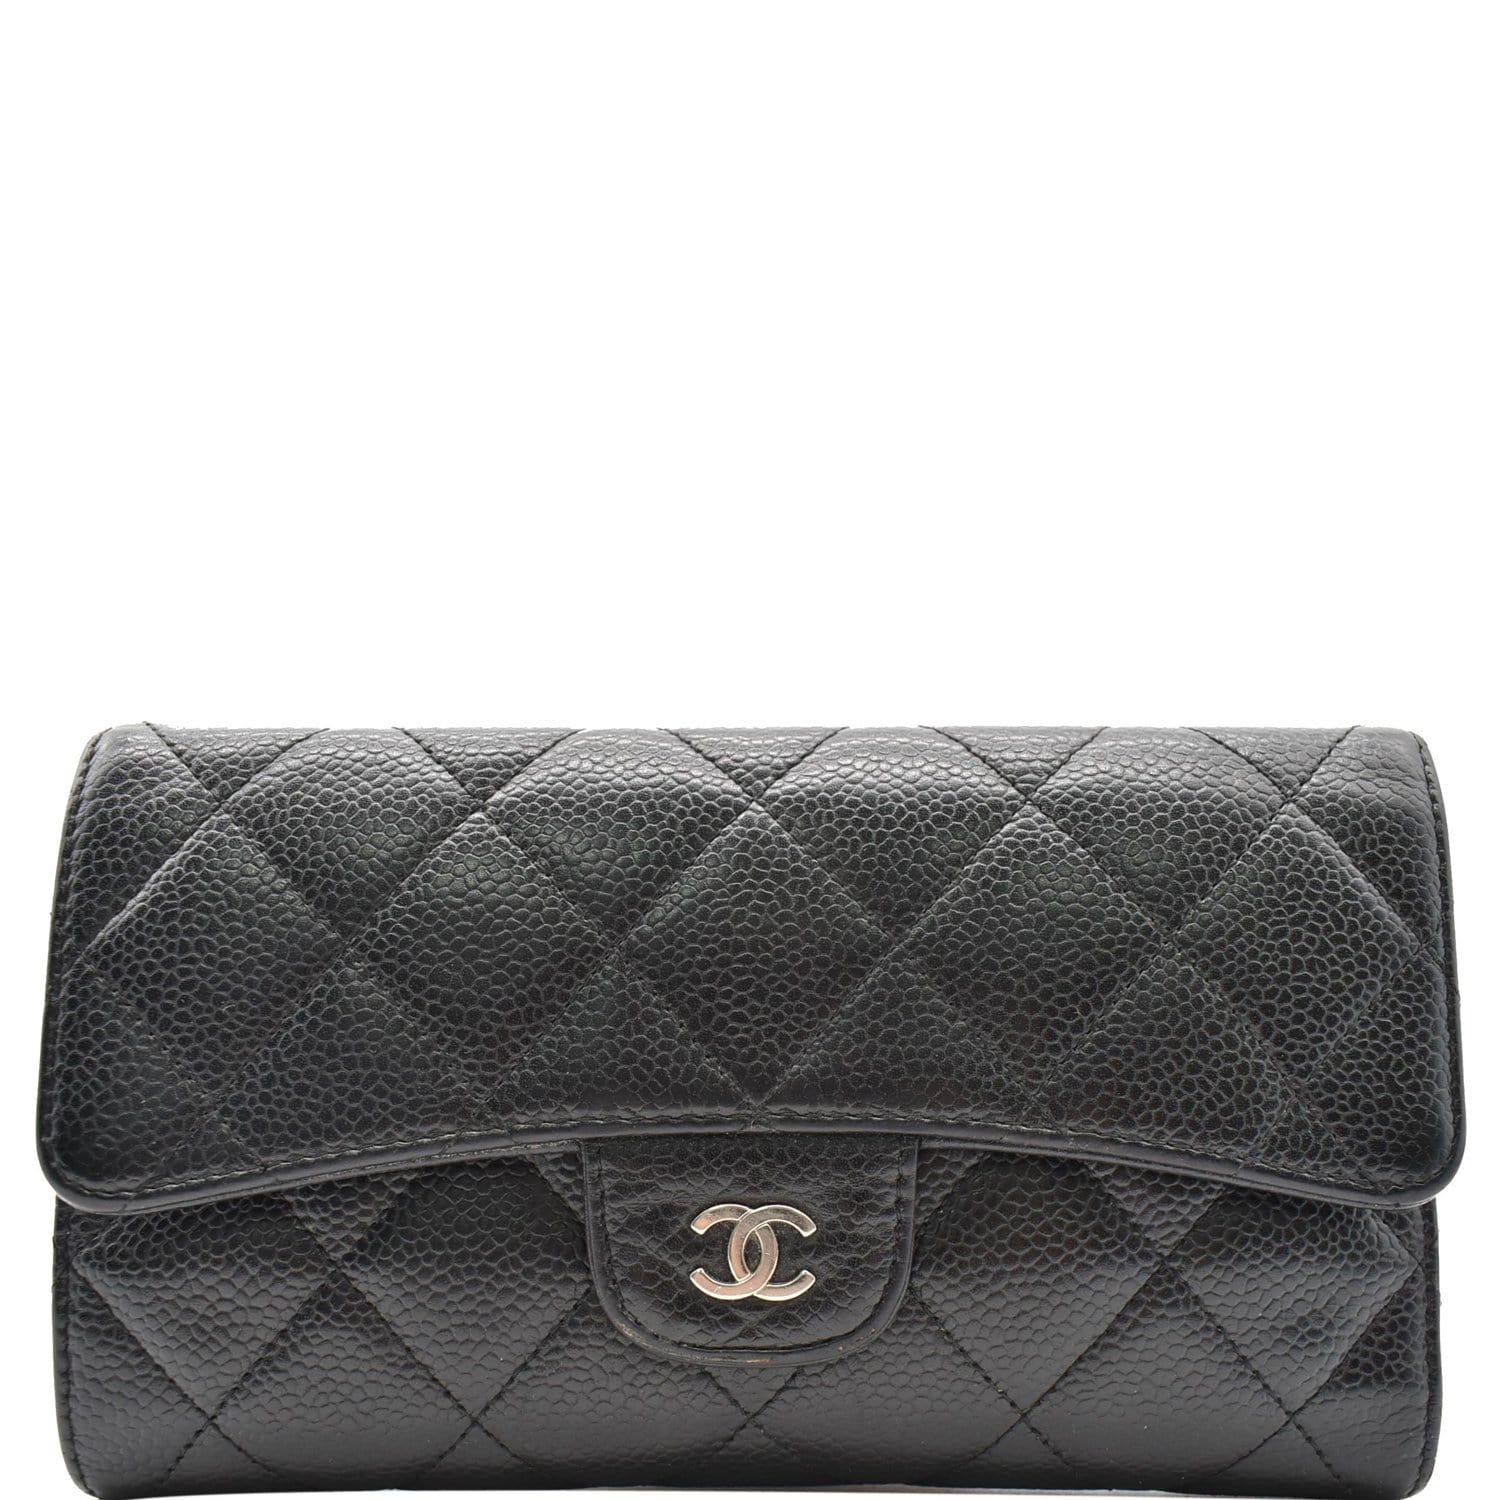 Authentic Chanel Black Saffiano Leather CC Logo Large Flap Bag Wallet for  Sale in San Jose, CA - OfferUp